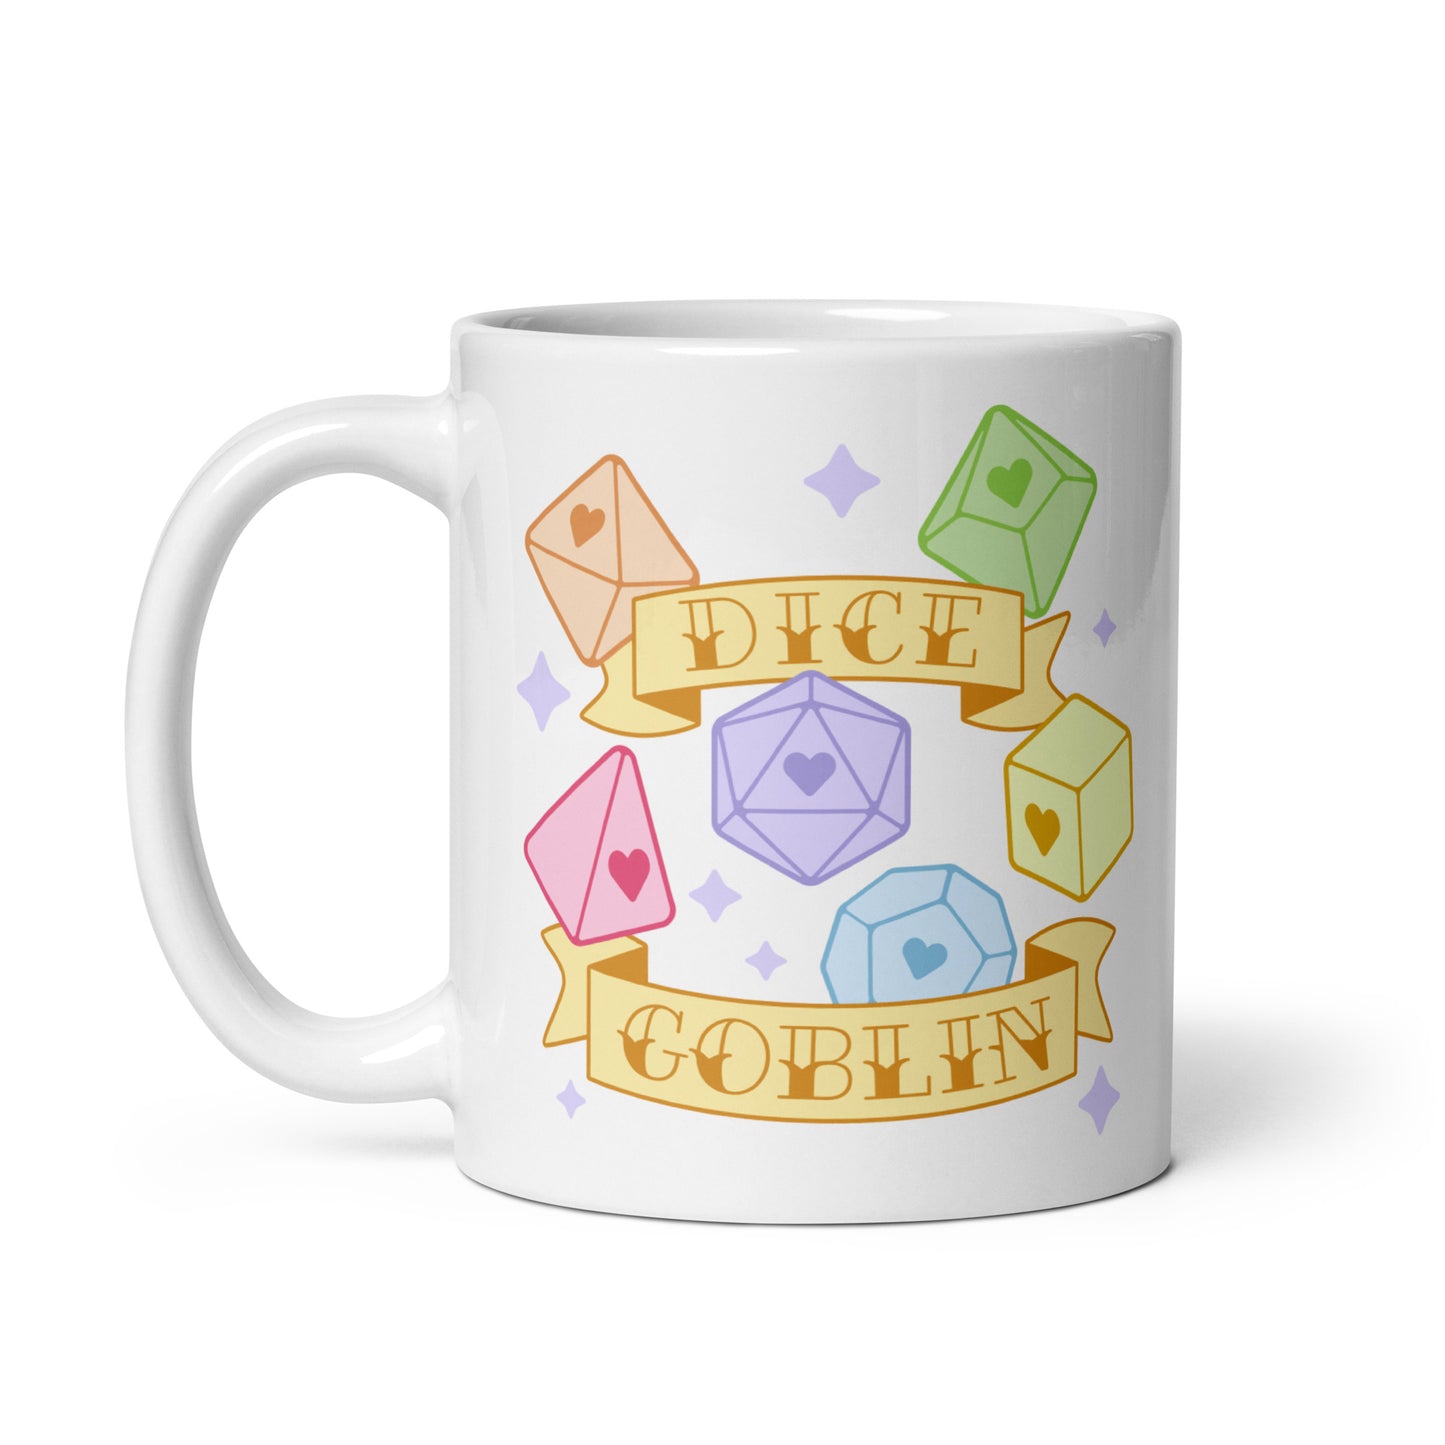 A white 11 ounce ceramic mug featuring an illustration of six polyhedral dice in pastel rainbow colors. Banners surround the dice. Text on the banners reads "Dice Goblin"